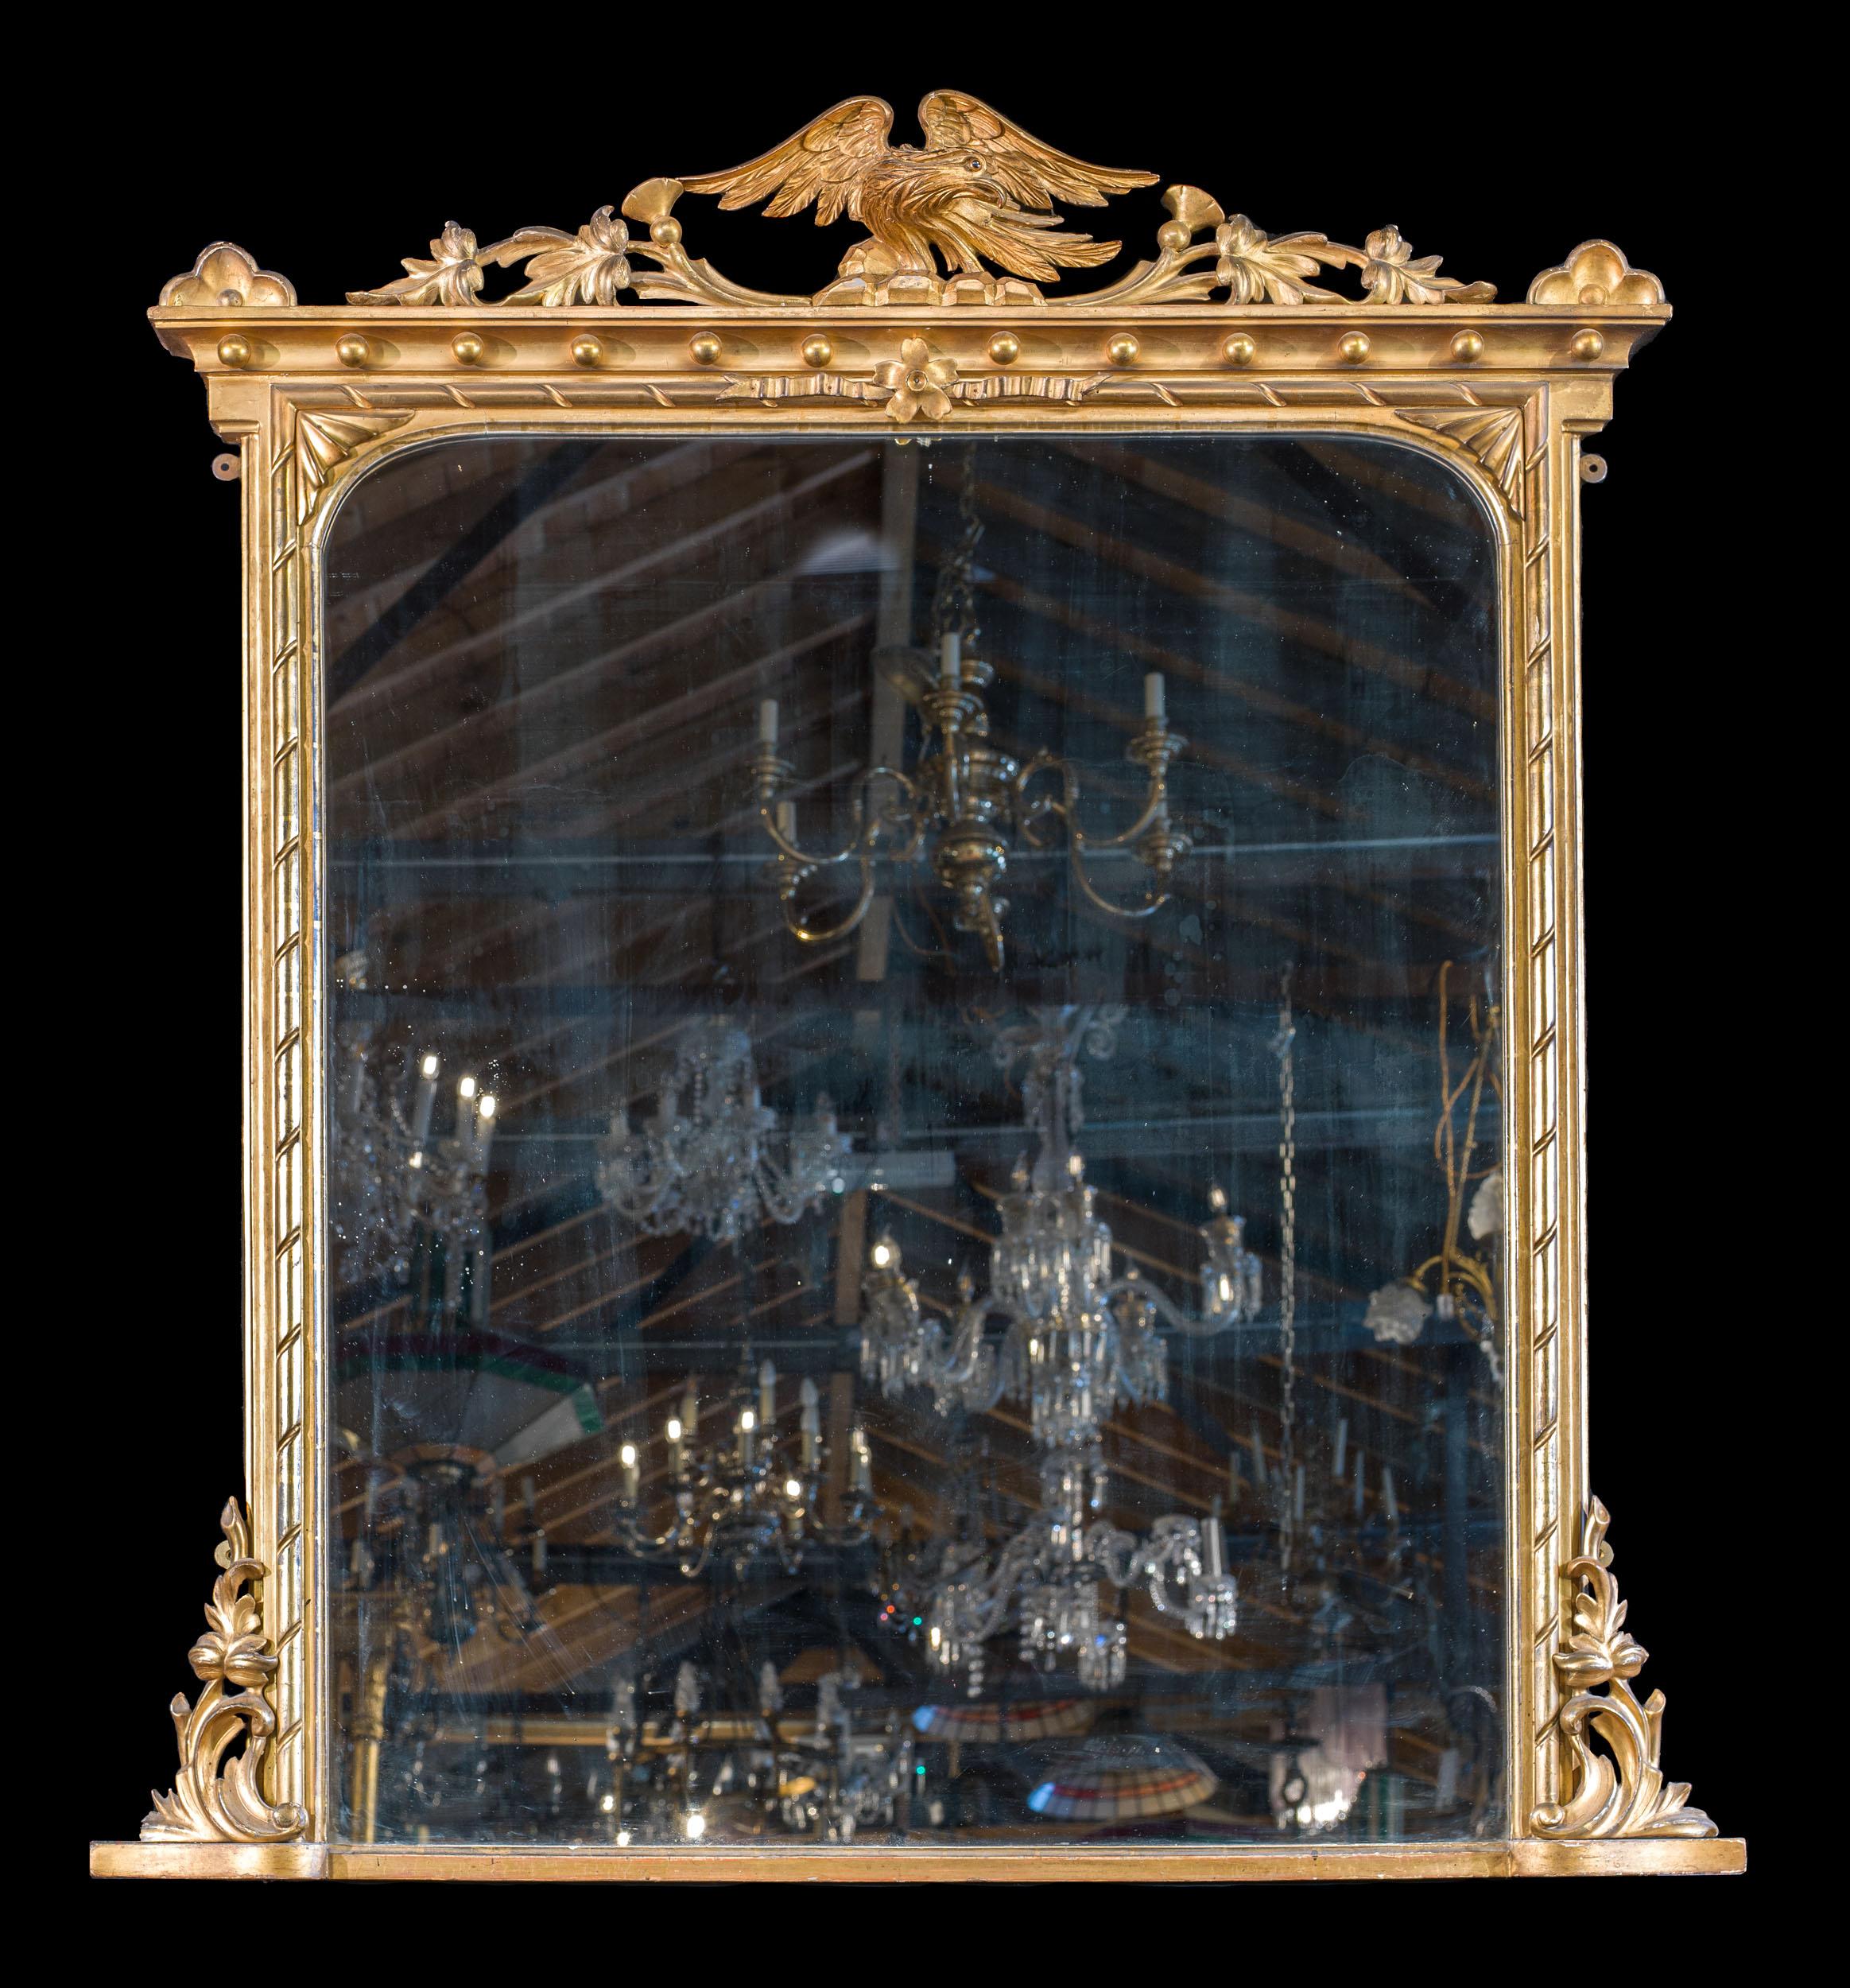 A large and grand pair of gilt gesso Victorian overmantel mirrors. The slender spiral fluted frames are surmounted by eagles on rocky outcrops, situated within a thistle decoration.
Provenance: Runnymede Park, Surrey.

English, circa 1850.